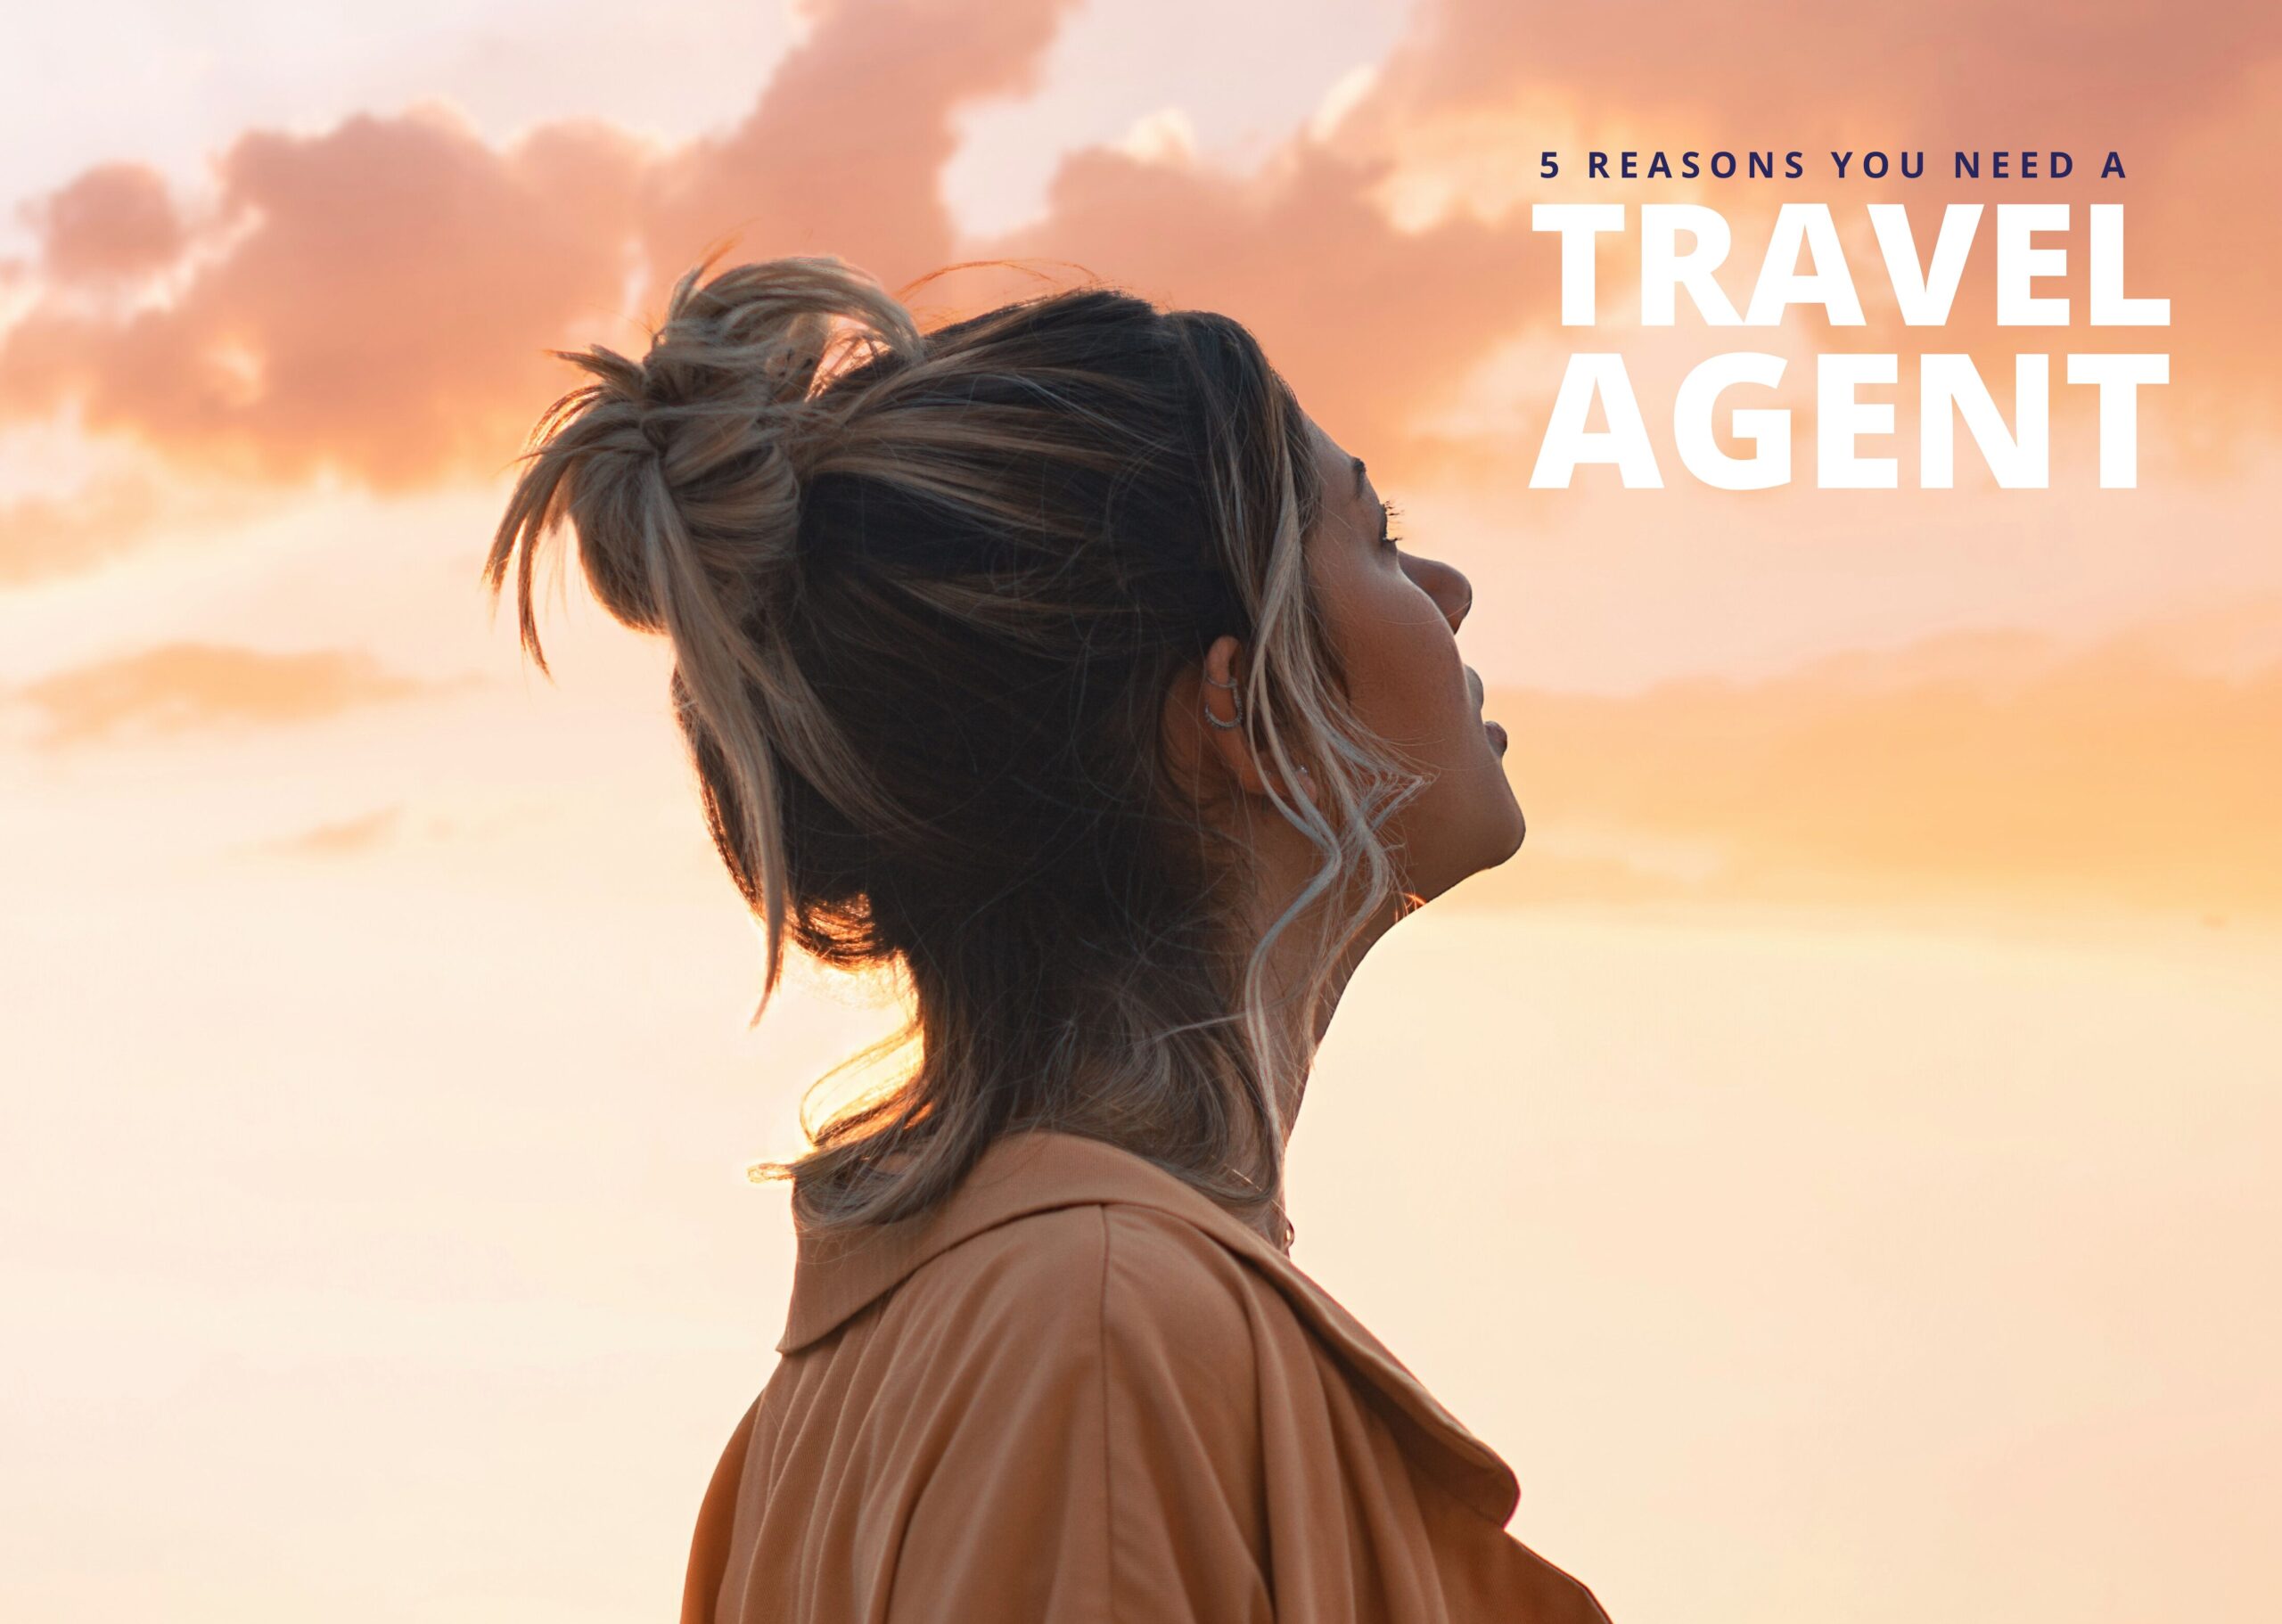 5 reasons you need a travel agent